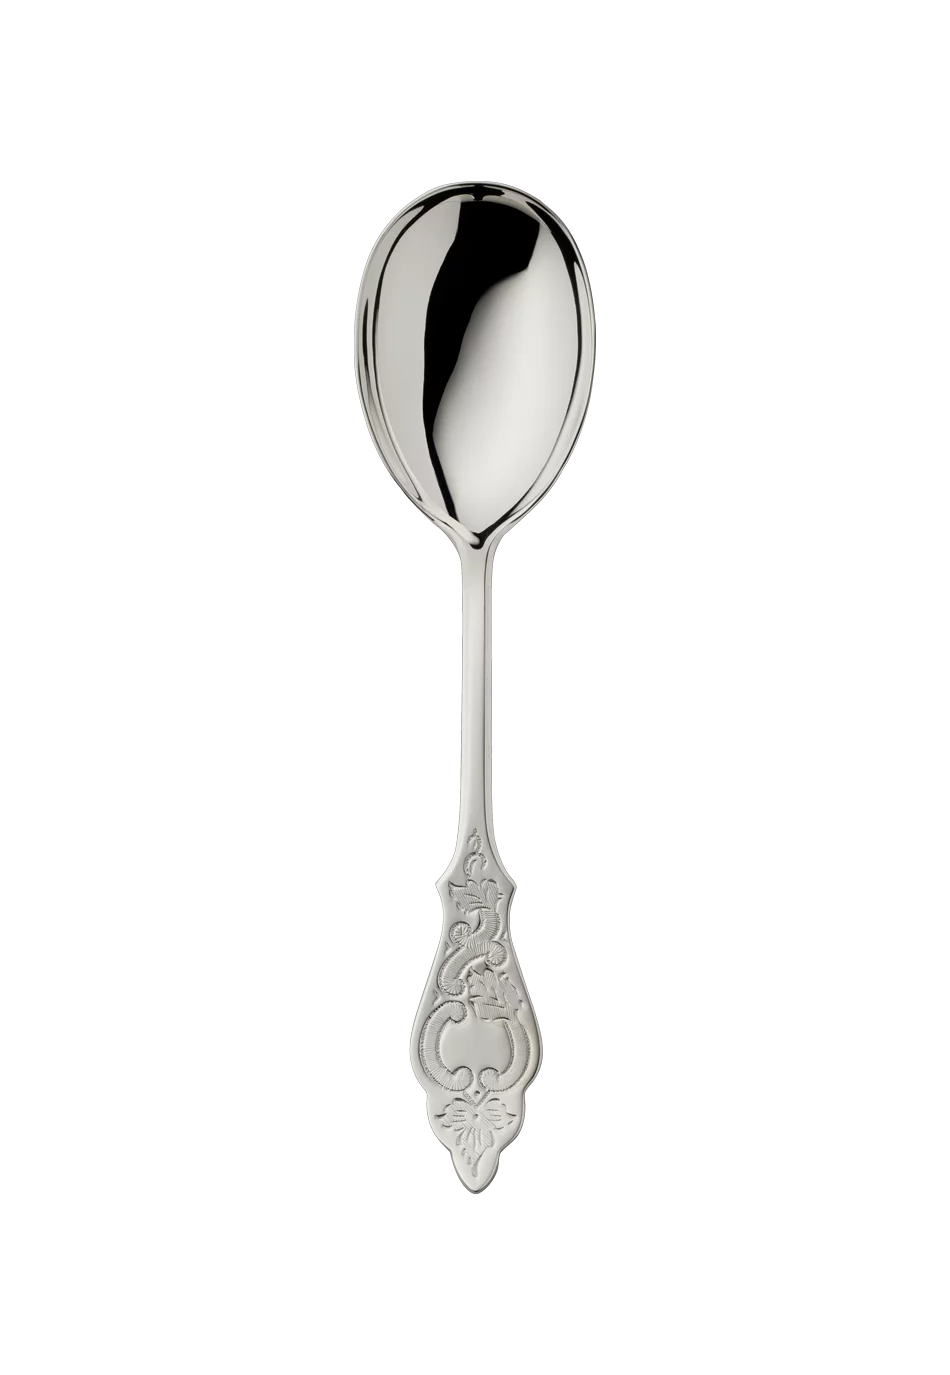 Ostfriesen Compote/Salad Serving Spoon, large (925 Sterling Silver)